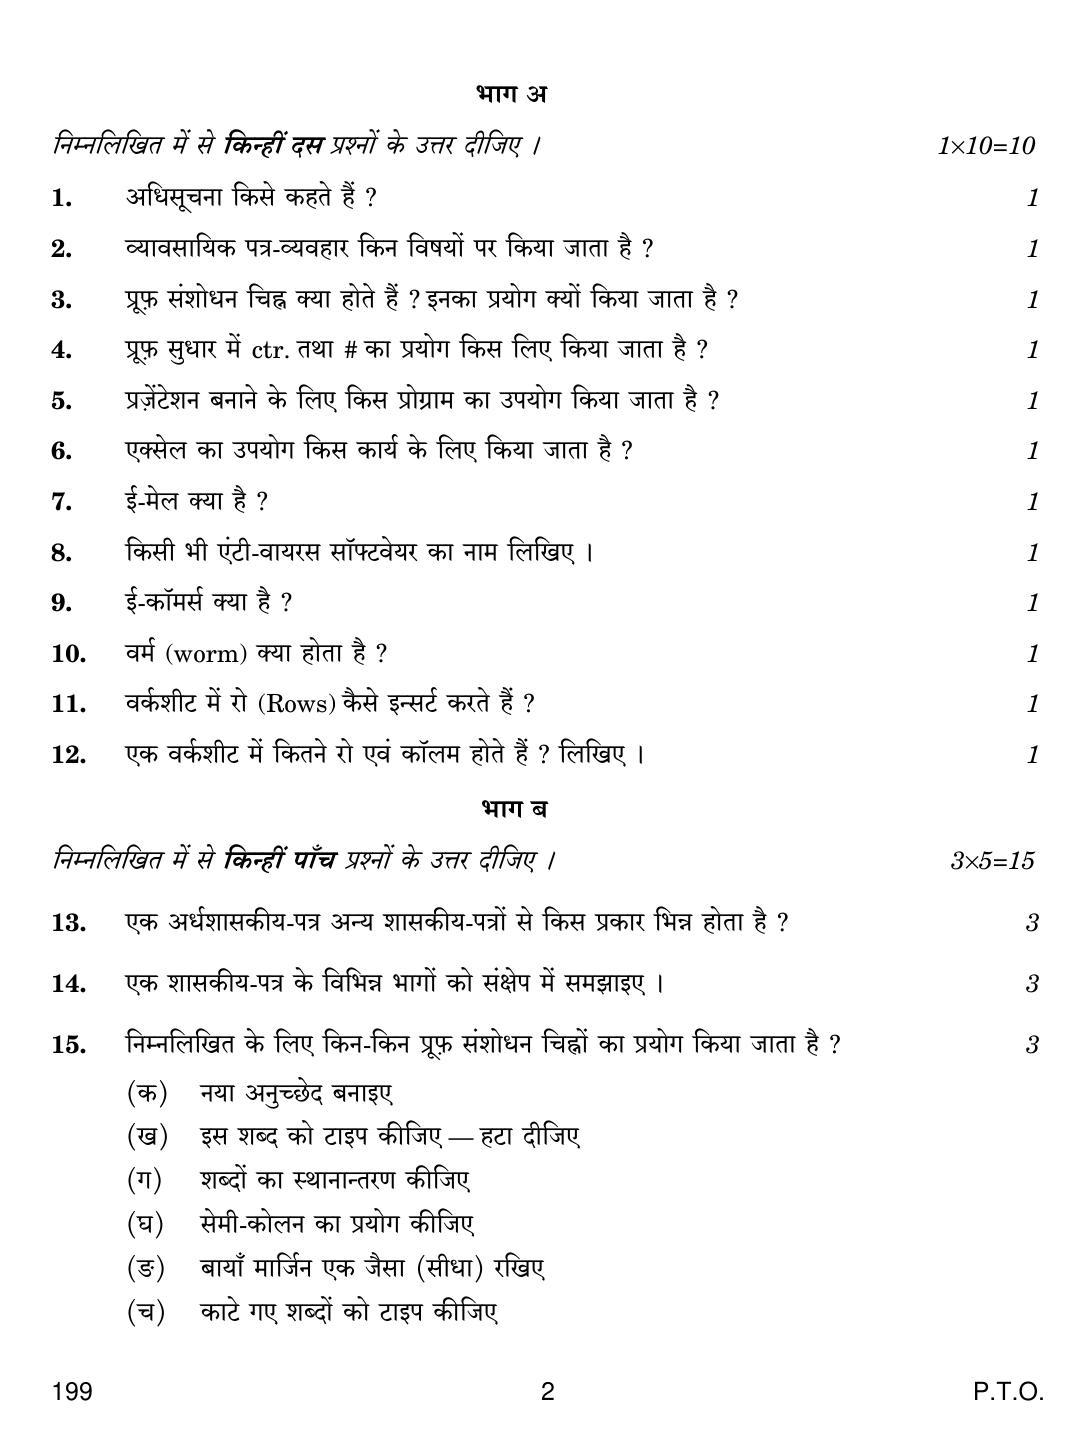 CBSE Class 12 199 Typography & Computer Application (Hindi) 2019 Question Paper - Page 2